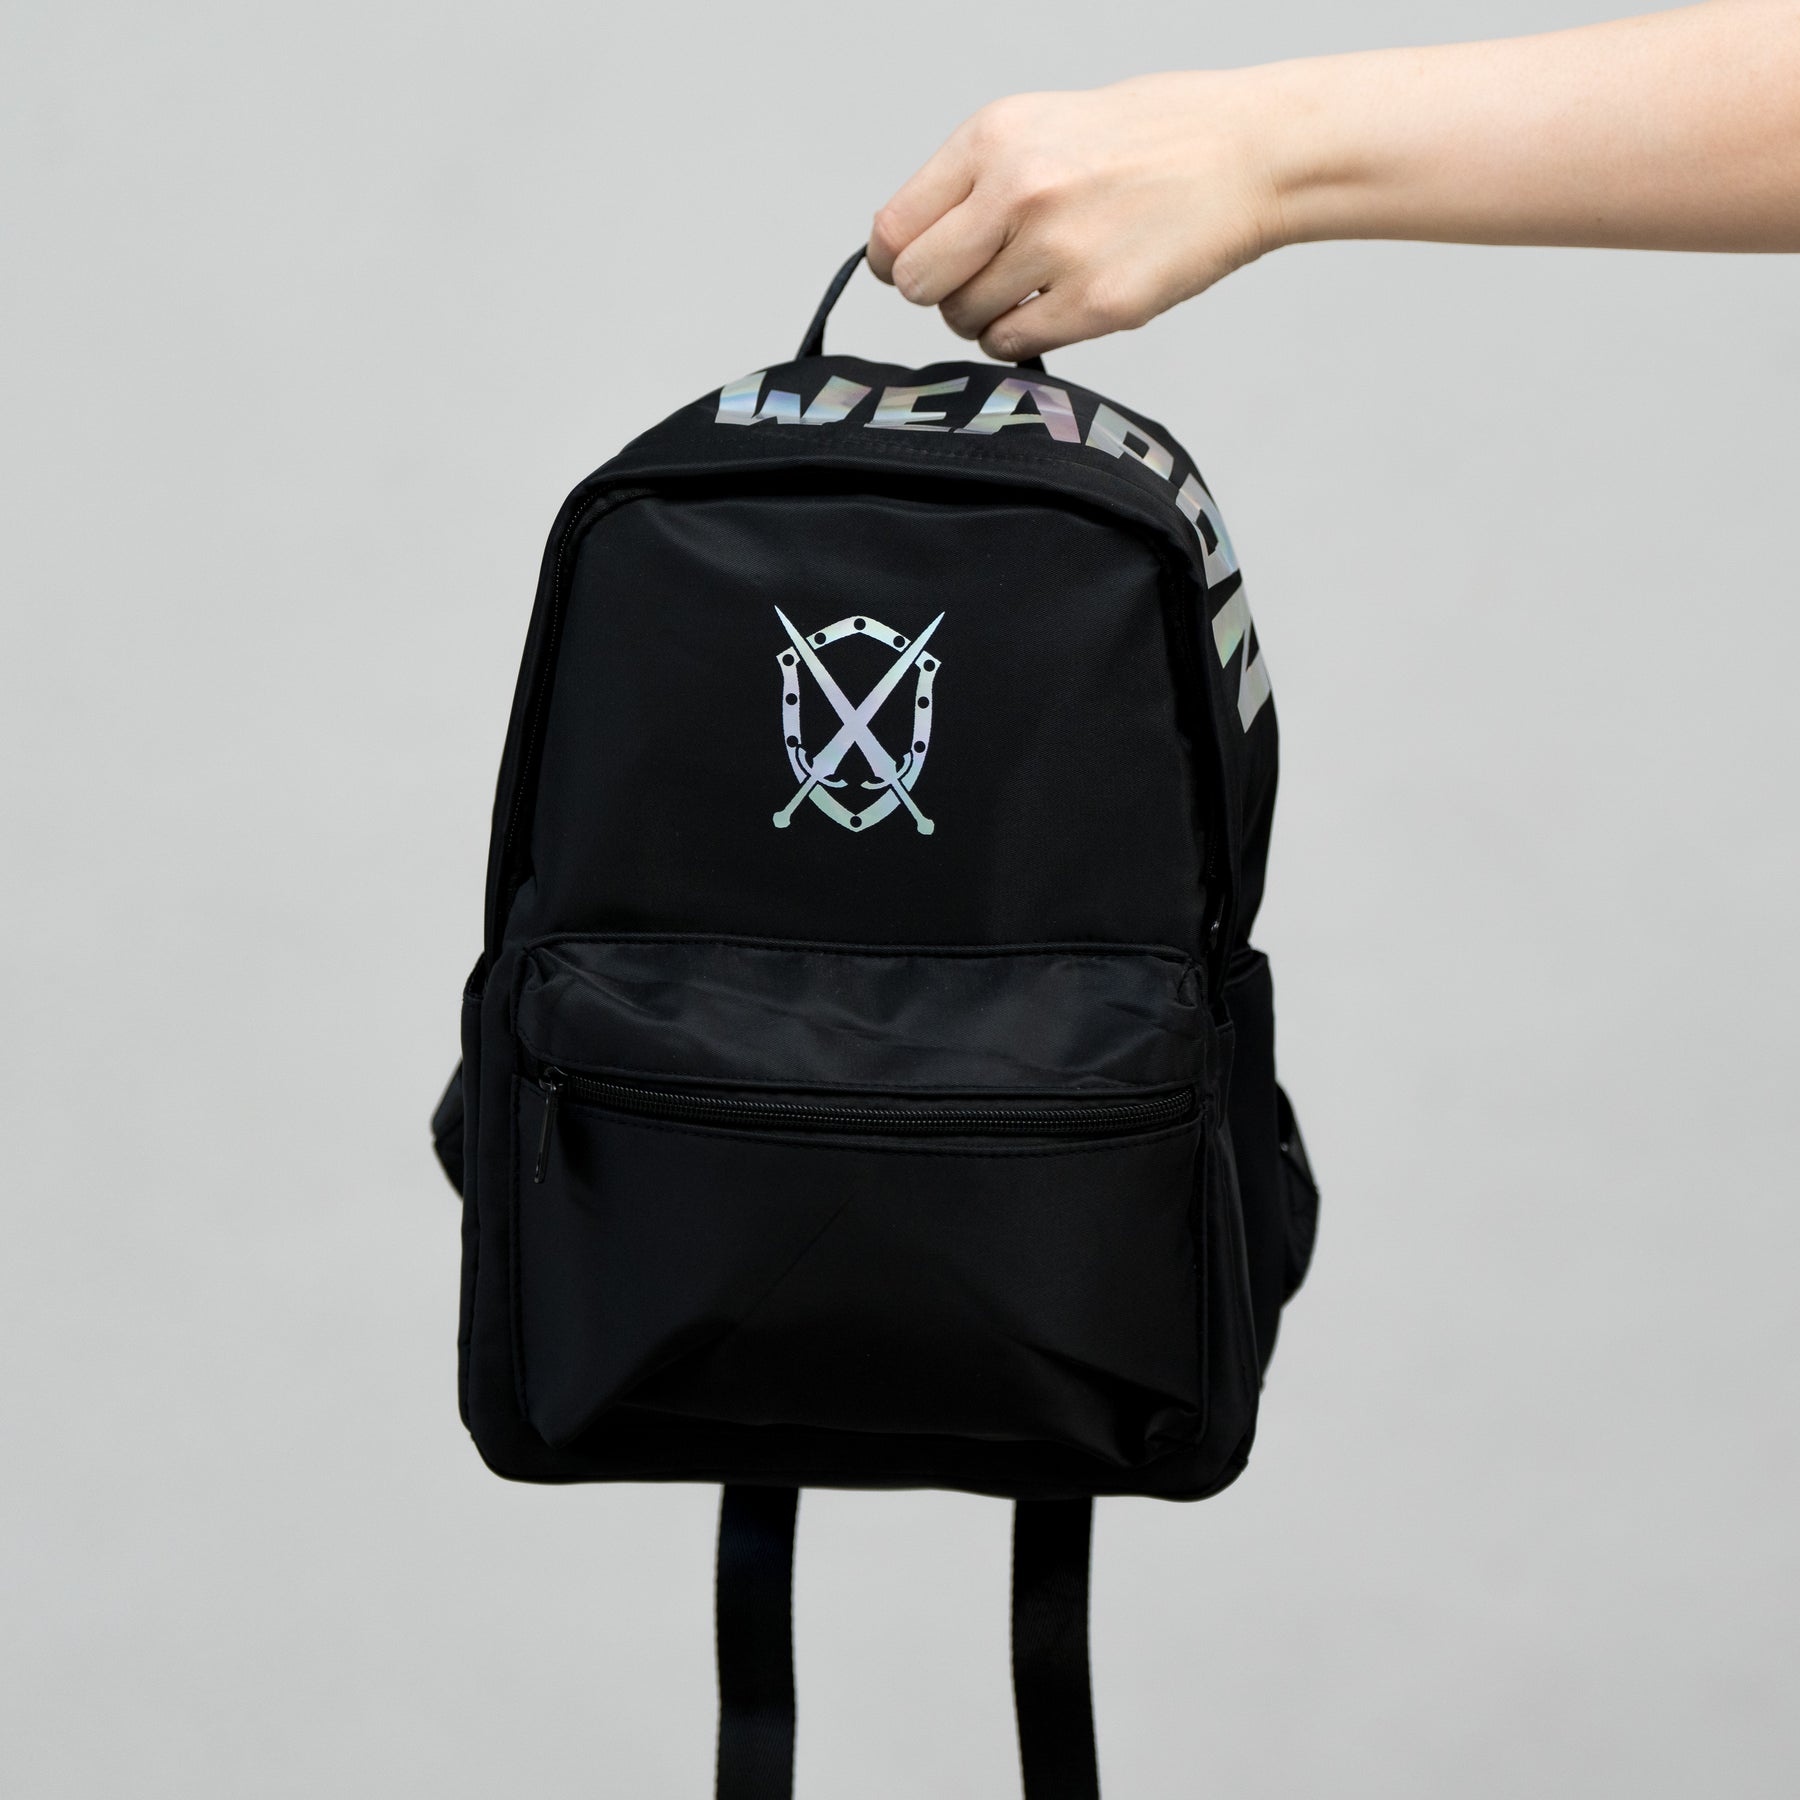 No Weapon Kids Backpack